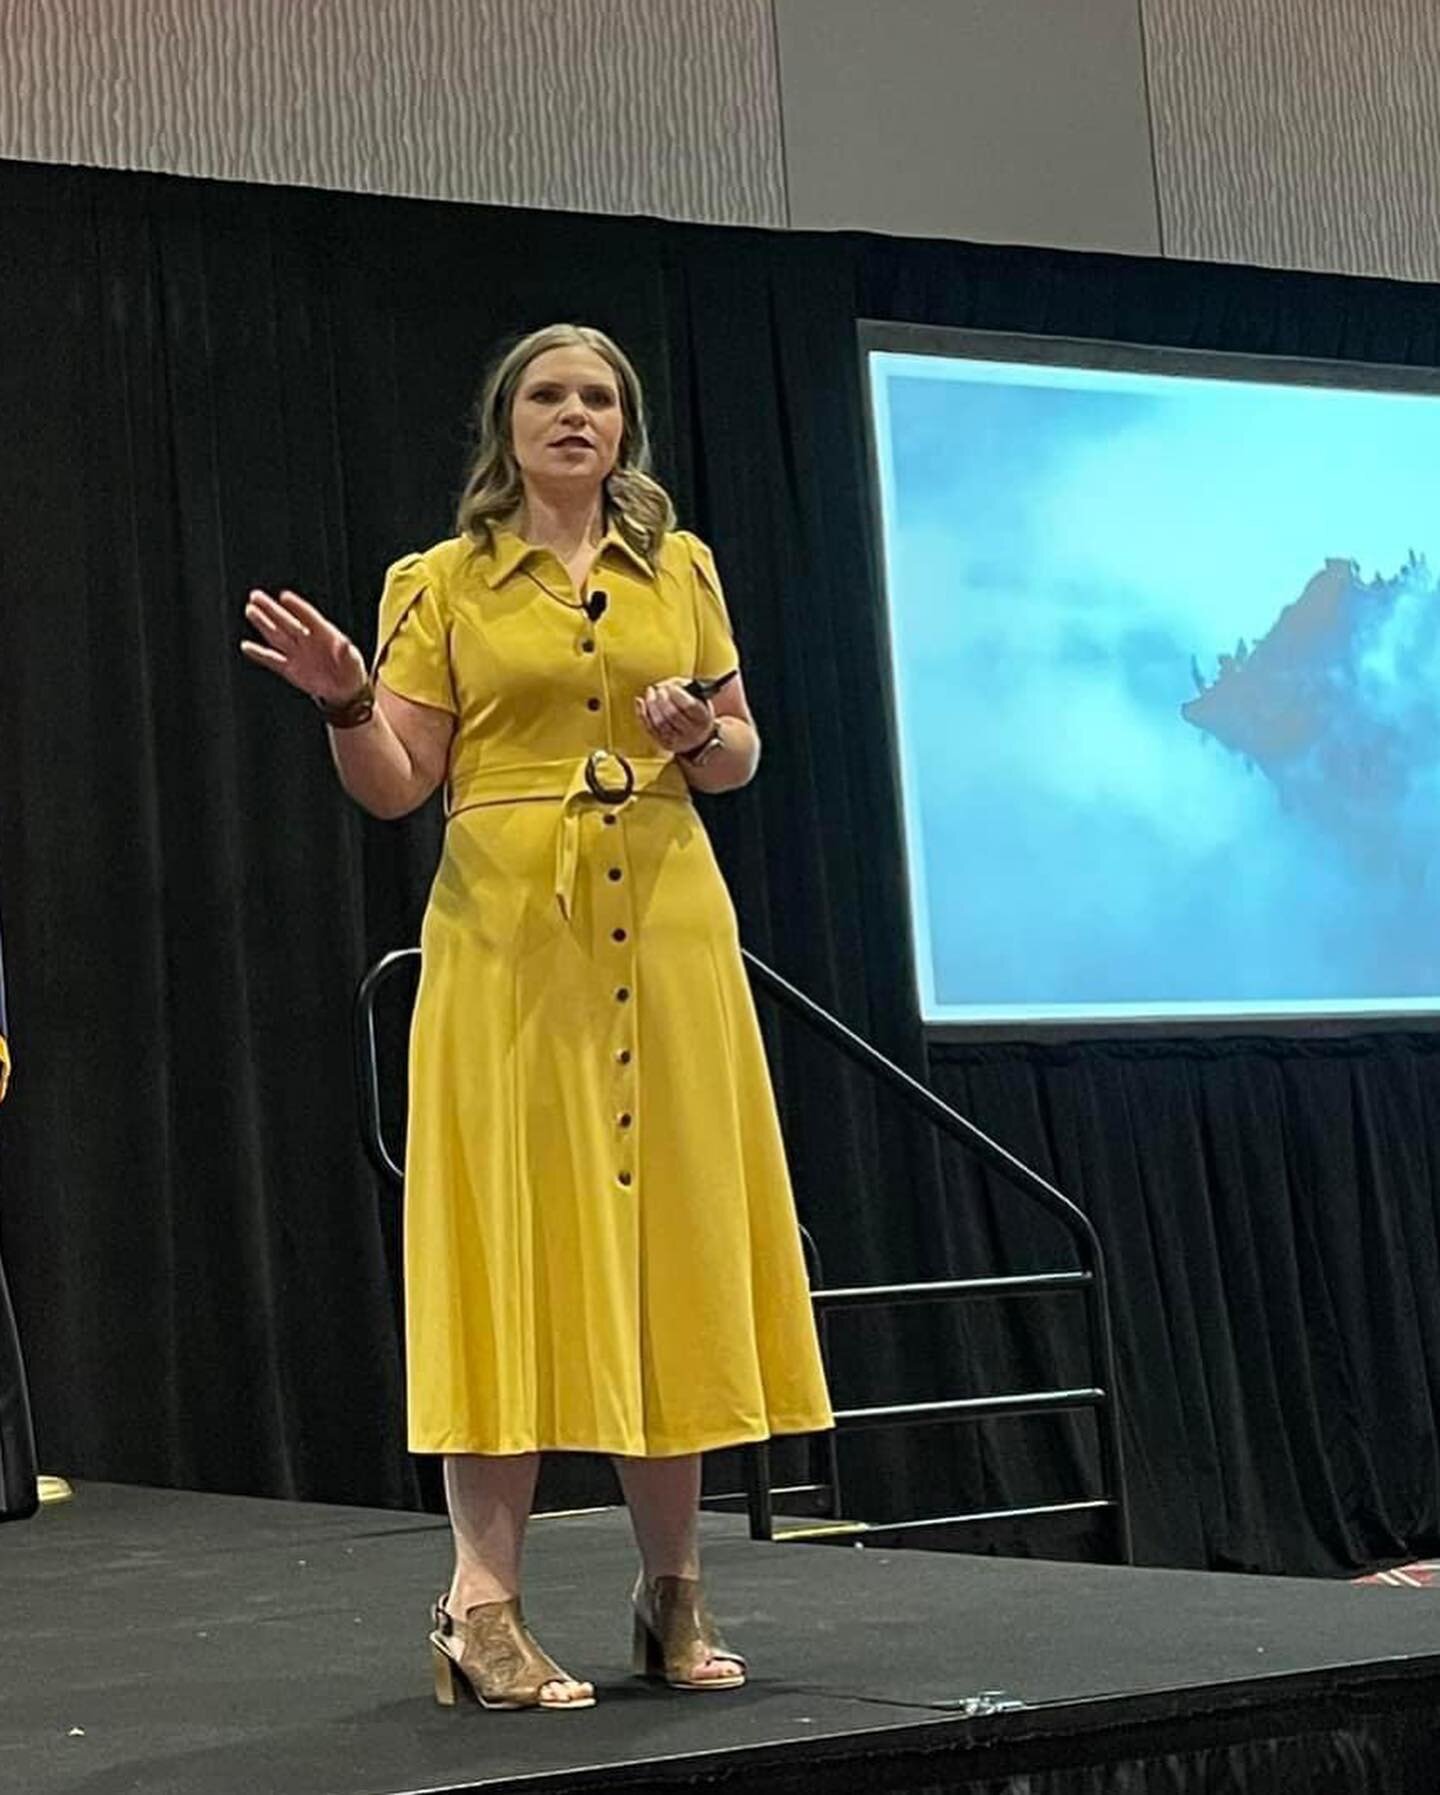 It&rsquo;s easy to get in my head before a keynote, stressing that I might say the wrong thing, trip walking up to the stage, sweat profusely through my dress, or worry what people might think of me.

To manage my nerves, I always go into the bathroo